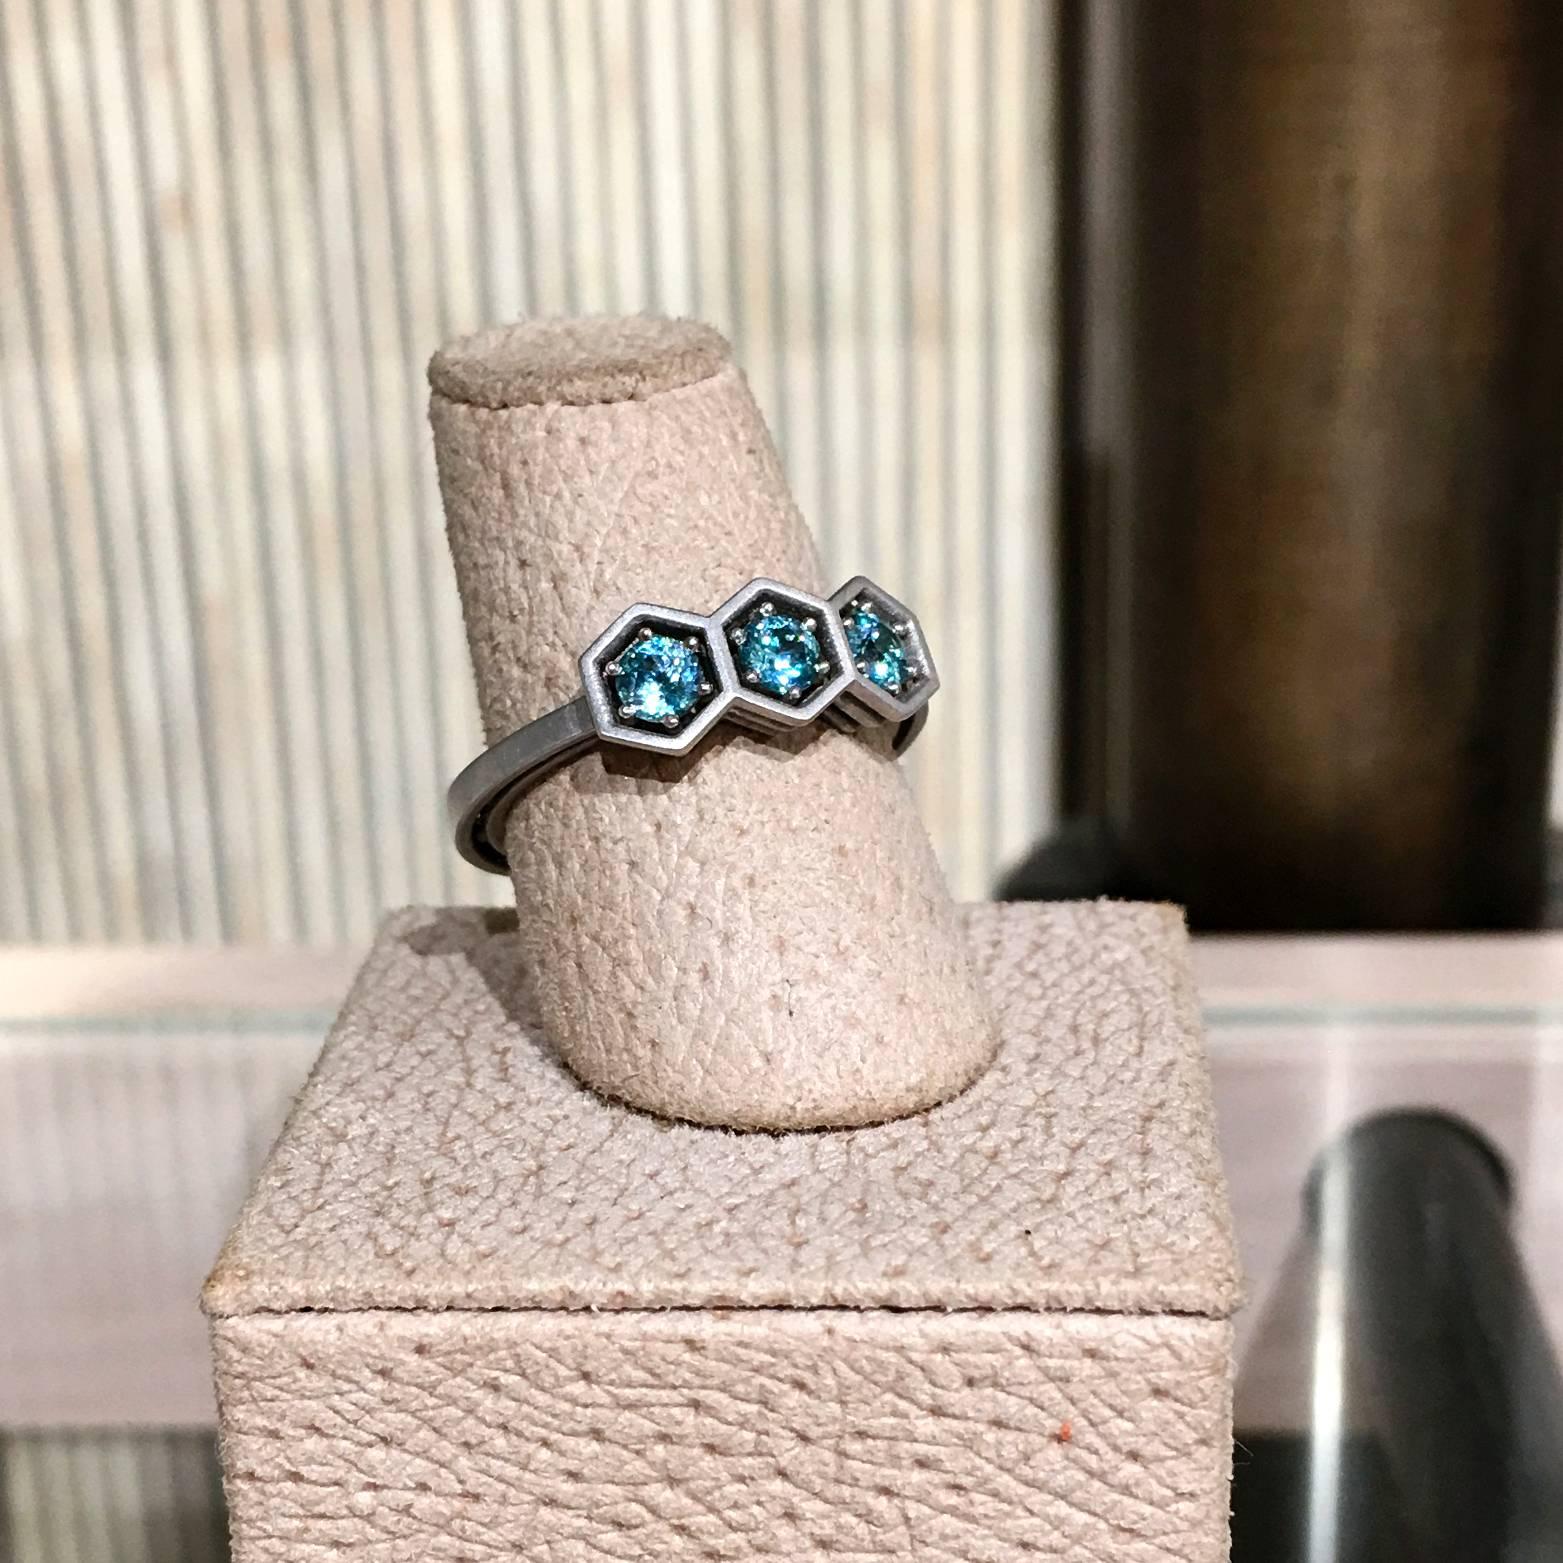 Three-Stone Hex Ring crafted in matte-finished 18k white gold with three brilliant blue zircons totaling 0.63 carats. Size 6.5 (can be sized).